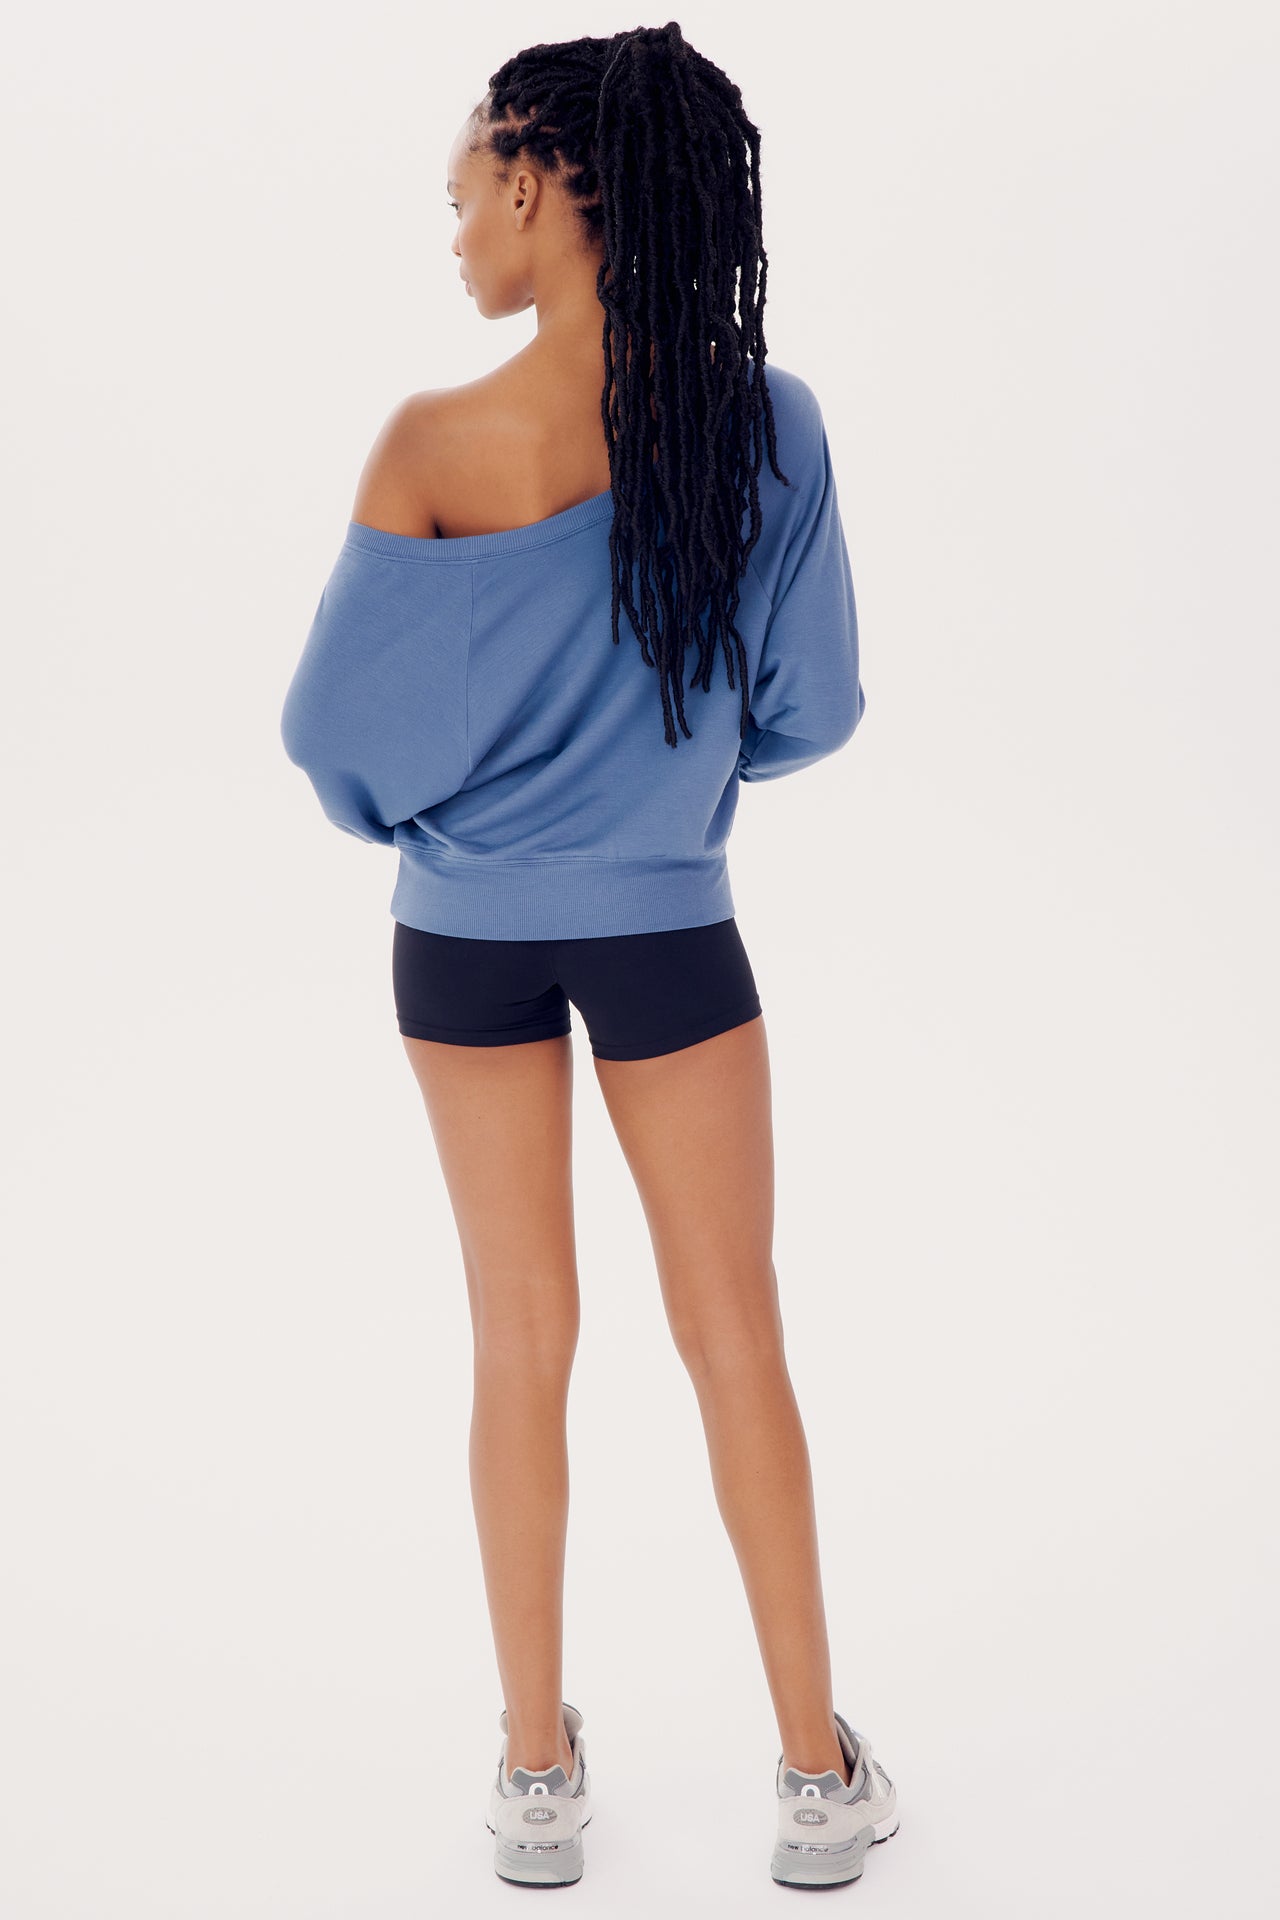 A woman in a blue SPLITS59 Indy Dolman Fleece Sweatshirt and black shorts, with braided hair, standing profile view against a white background.